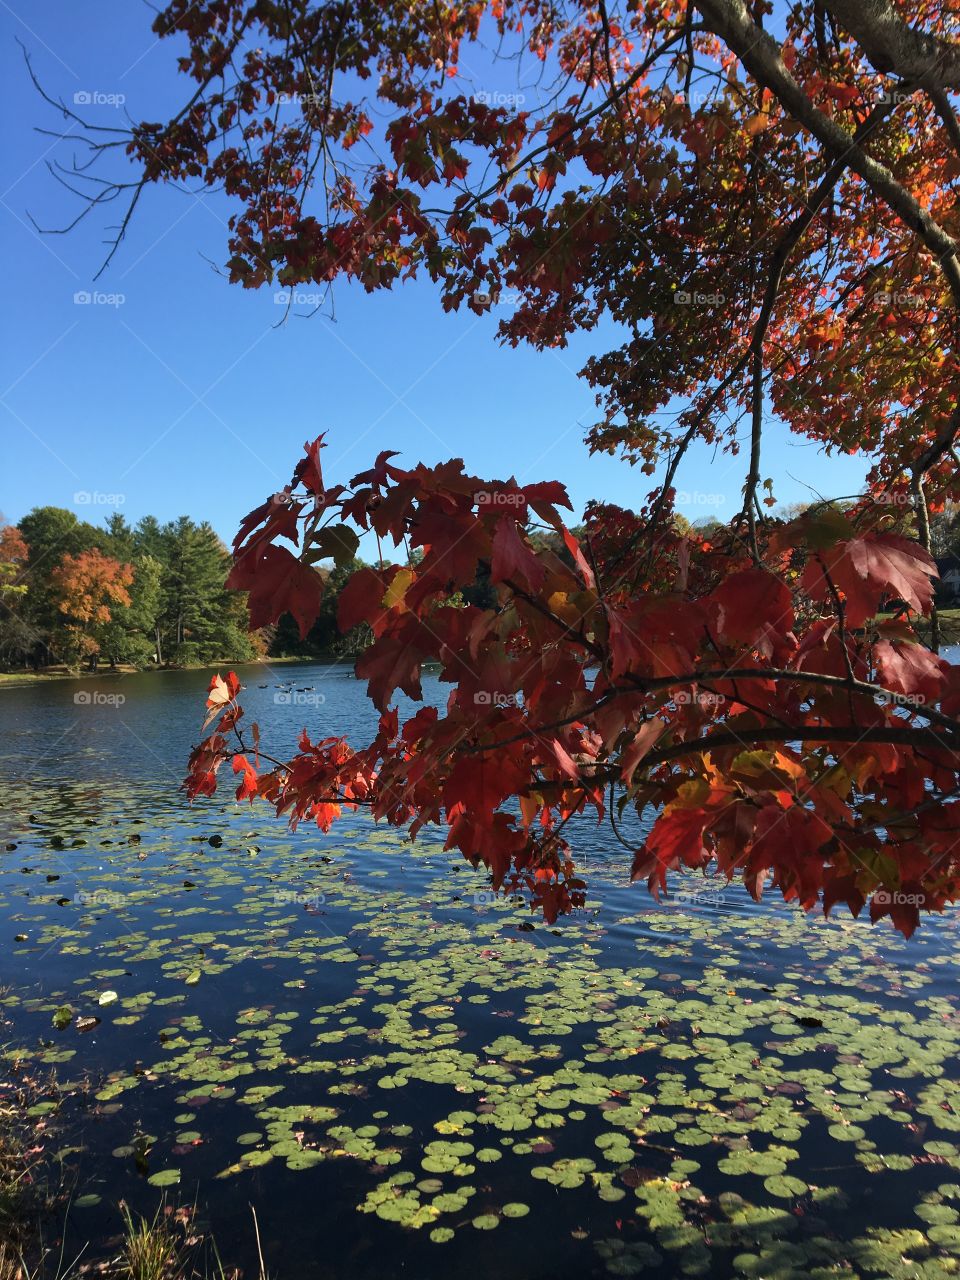 The red leaves of the tree contrast nicely with the blue water of the pond and the green of the lily pads. Little snapshot of a crisp New England fall day